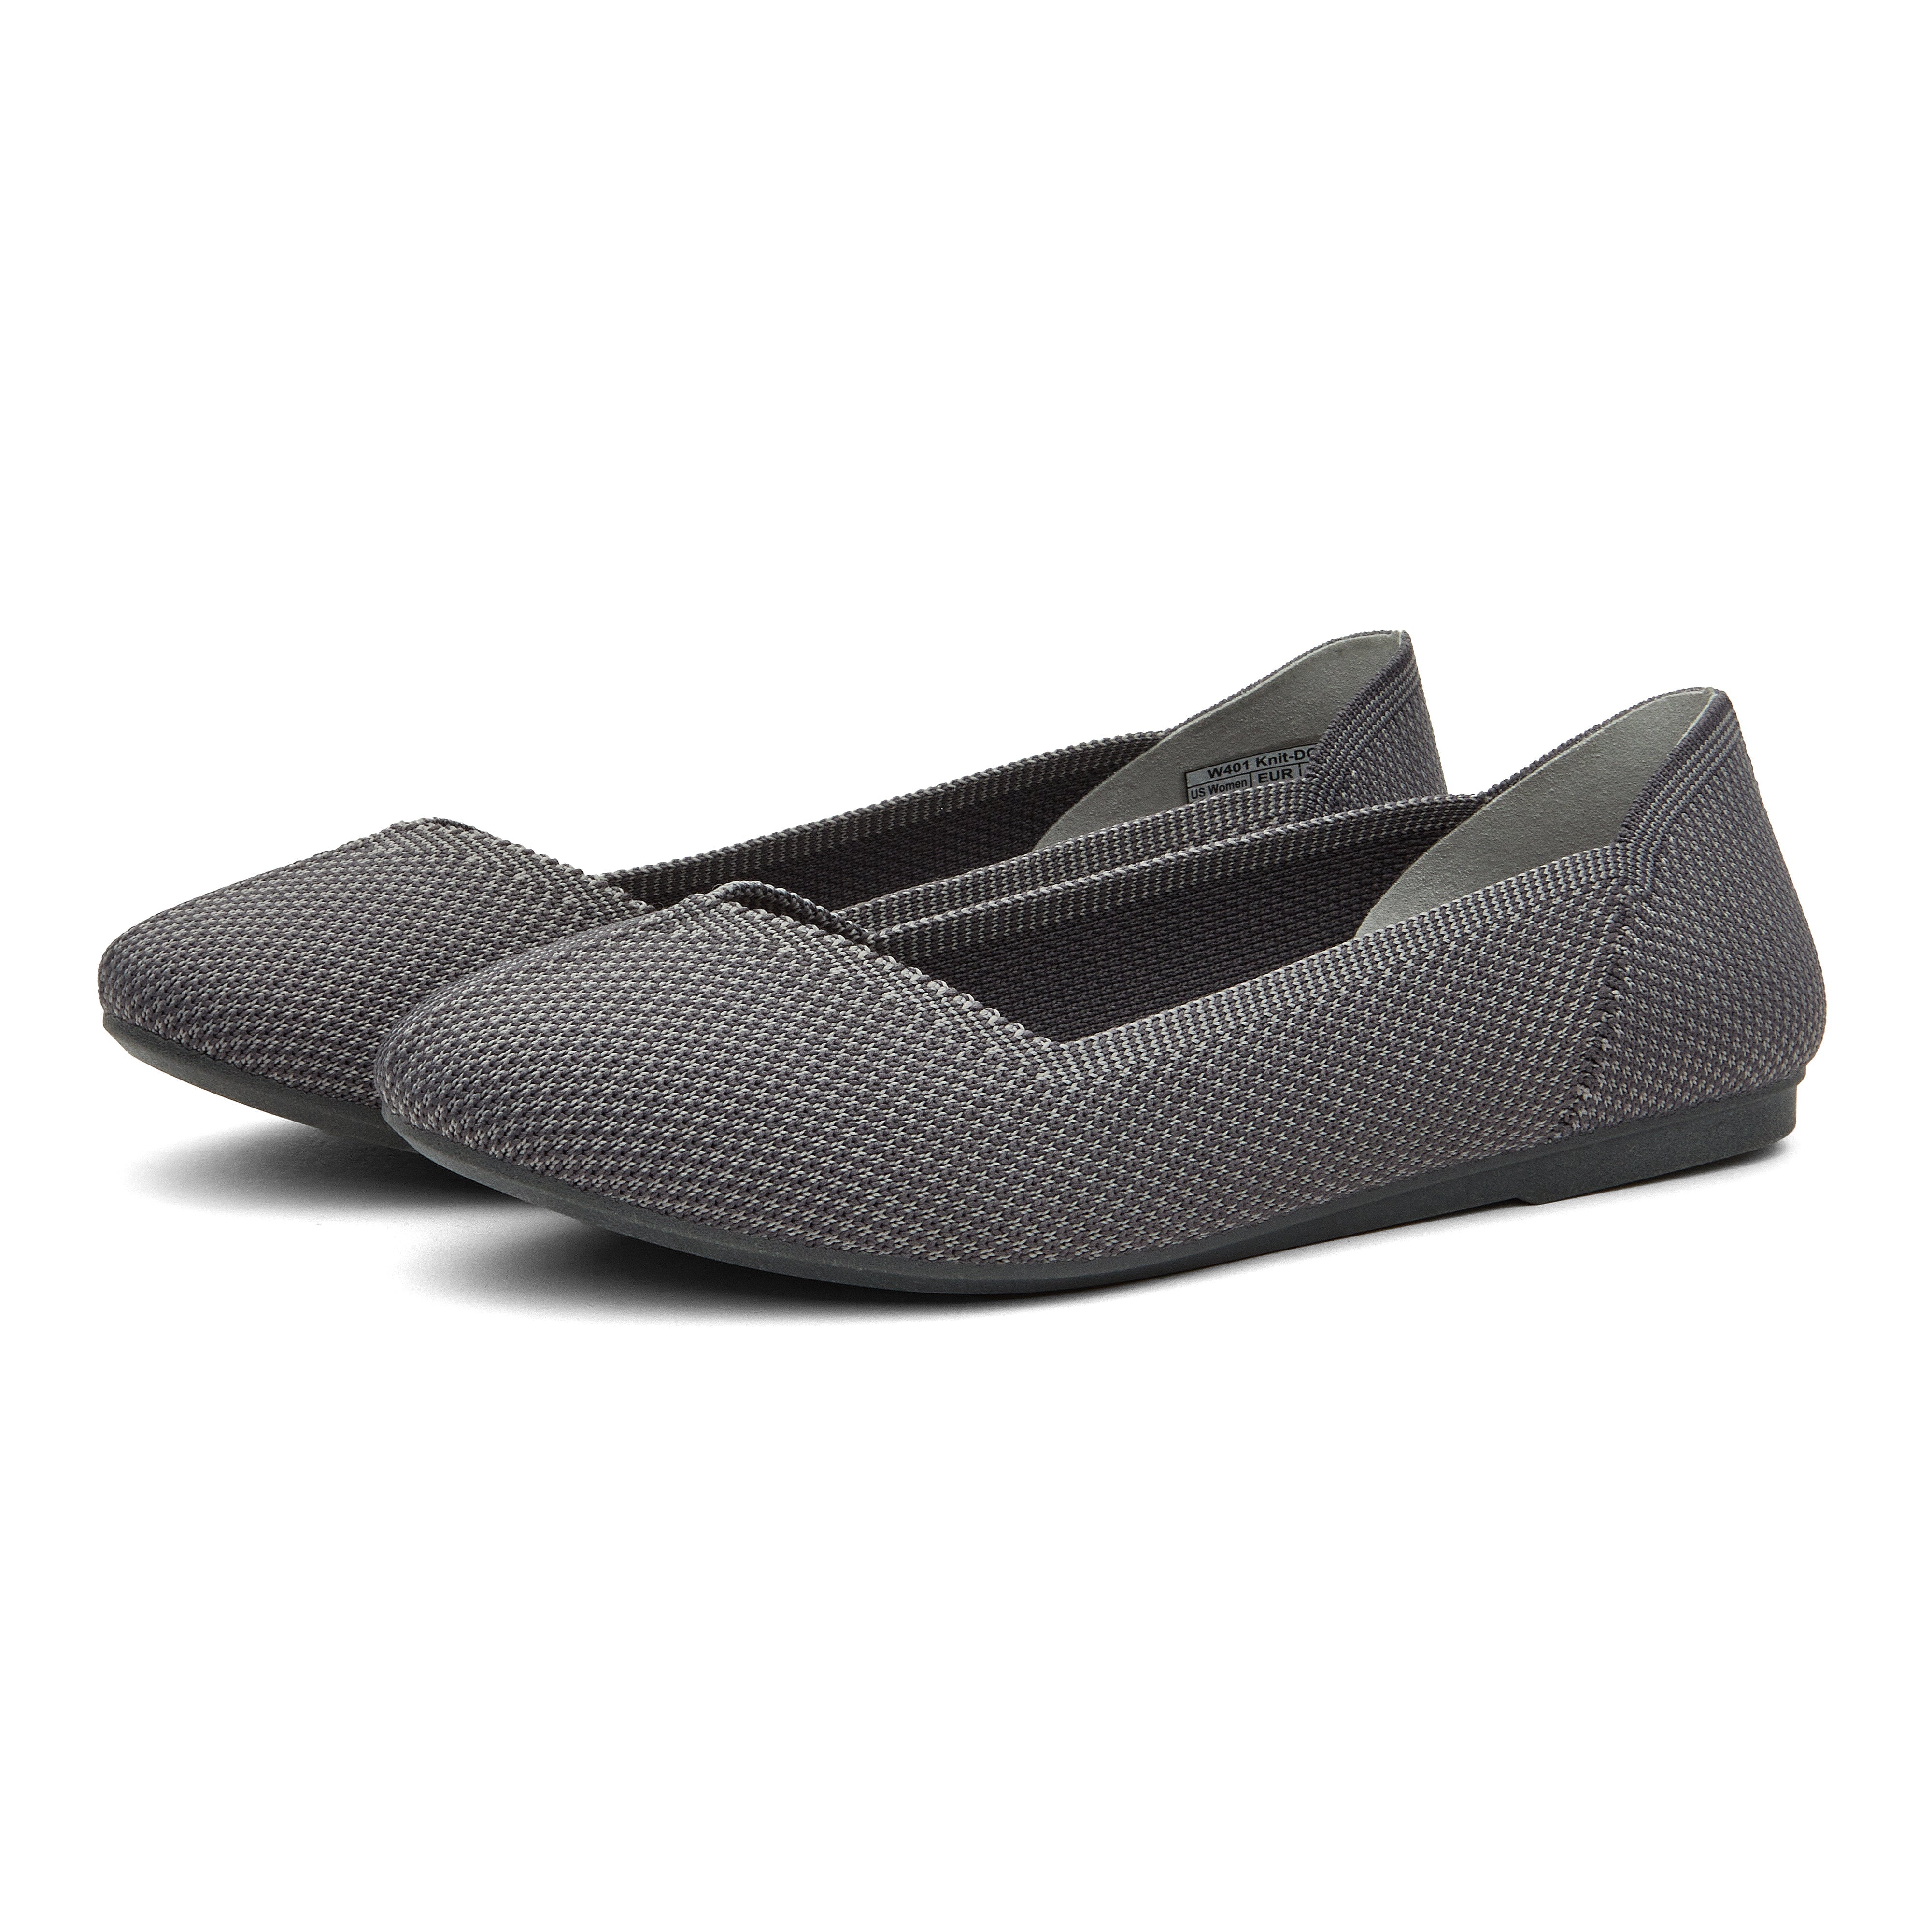 New Women Knit Woven Pointed Toe Flats